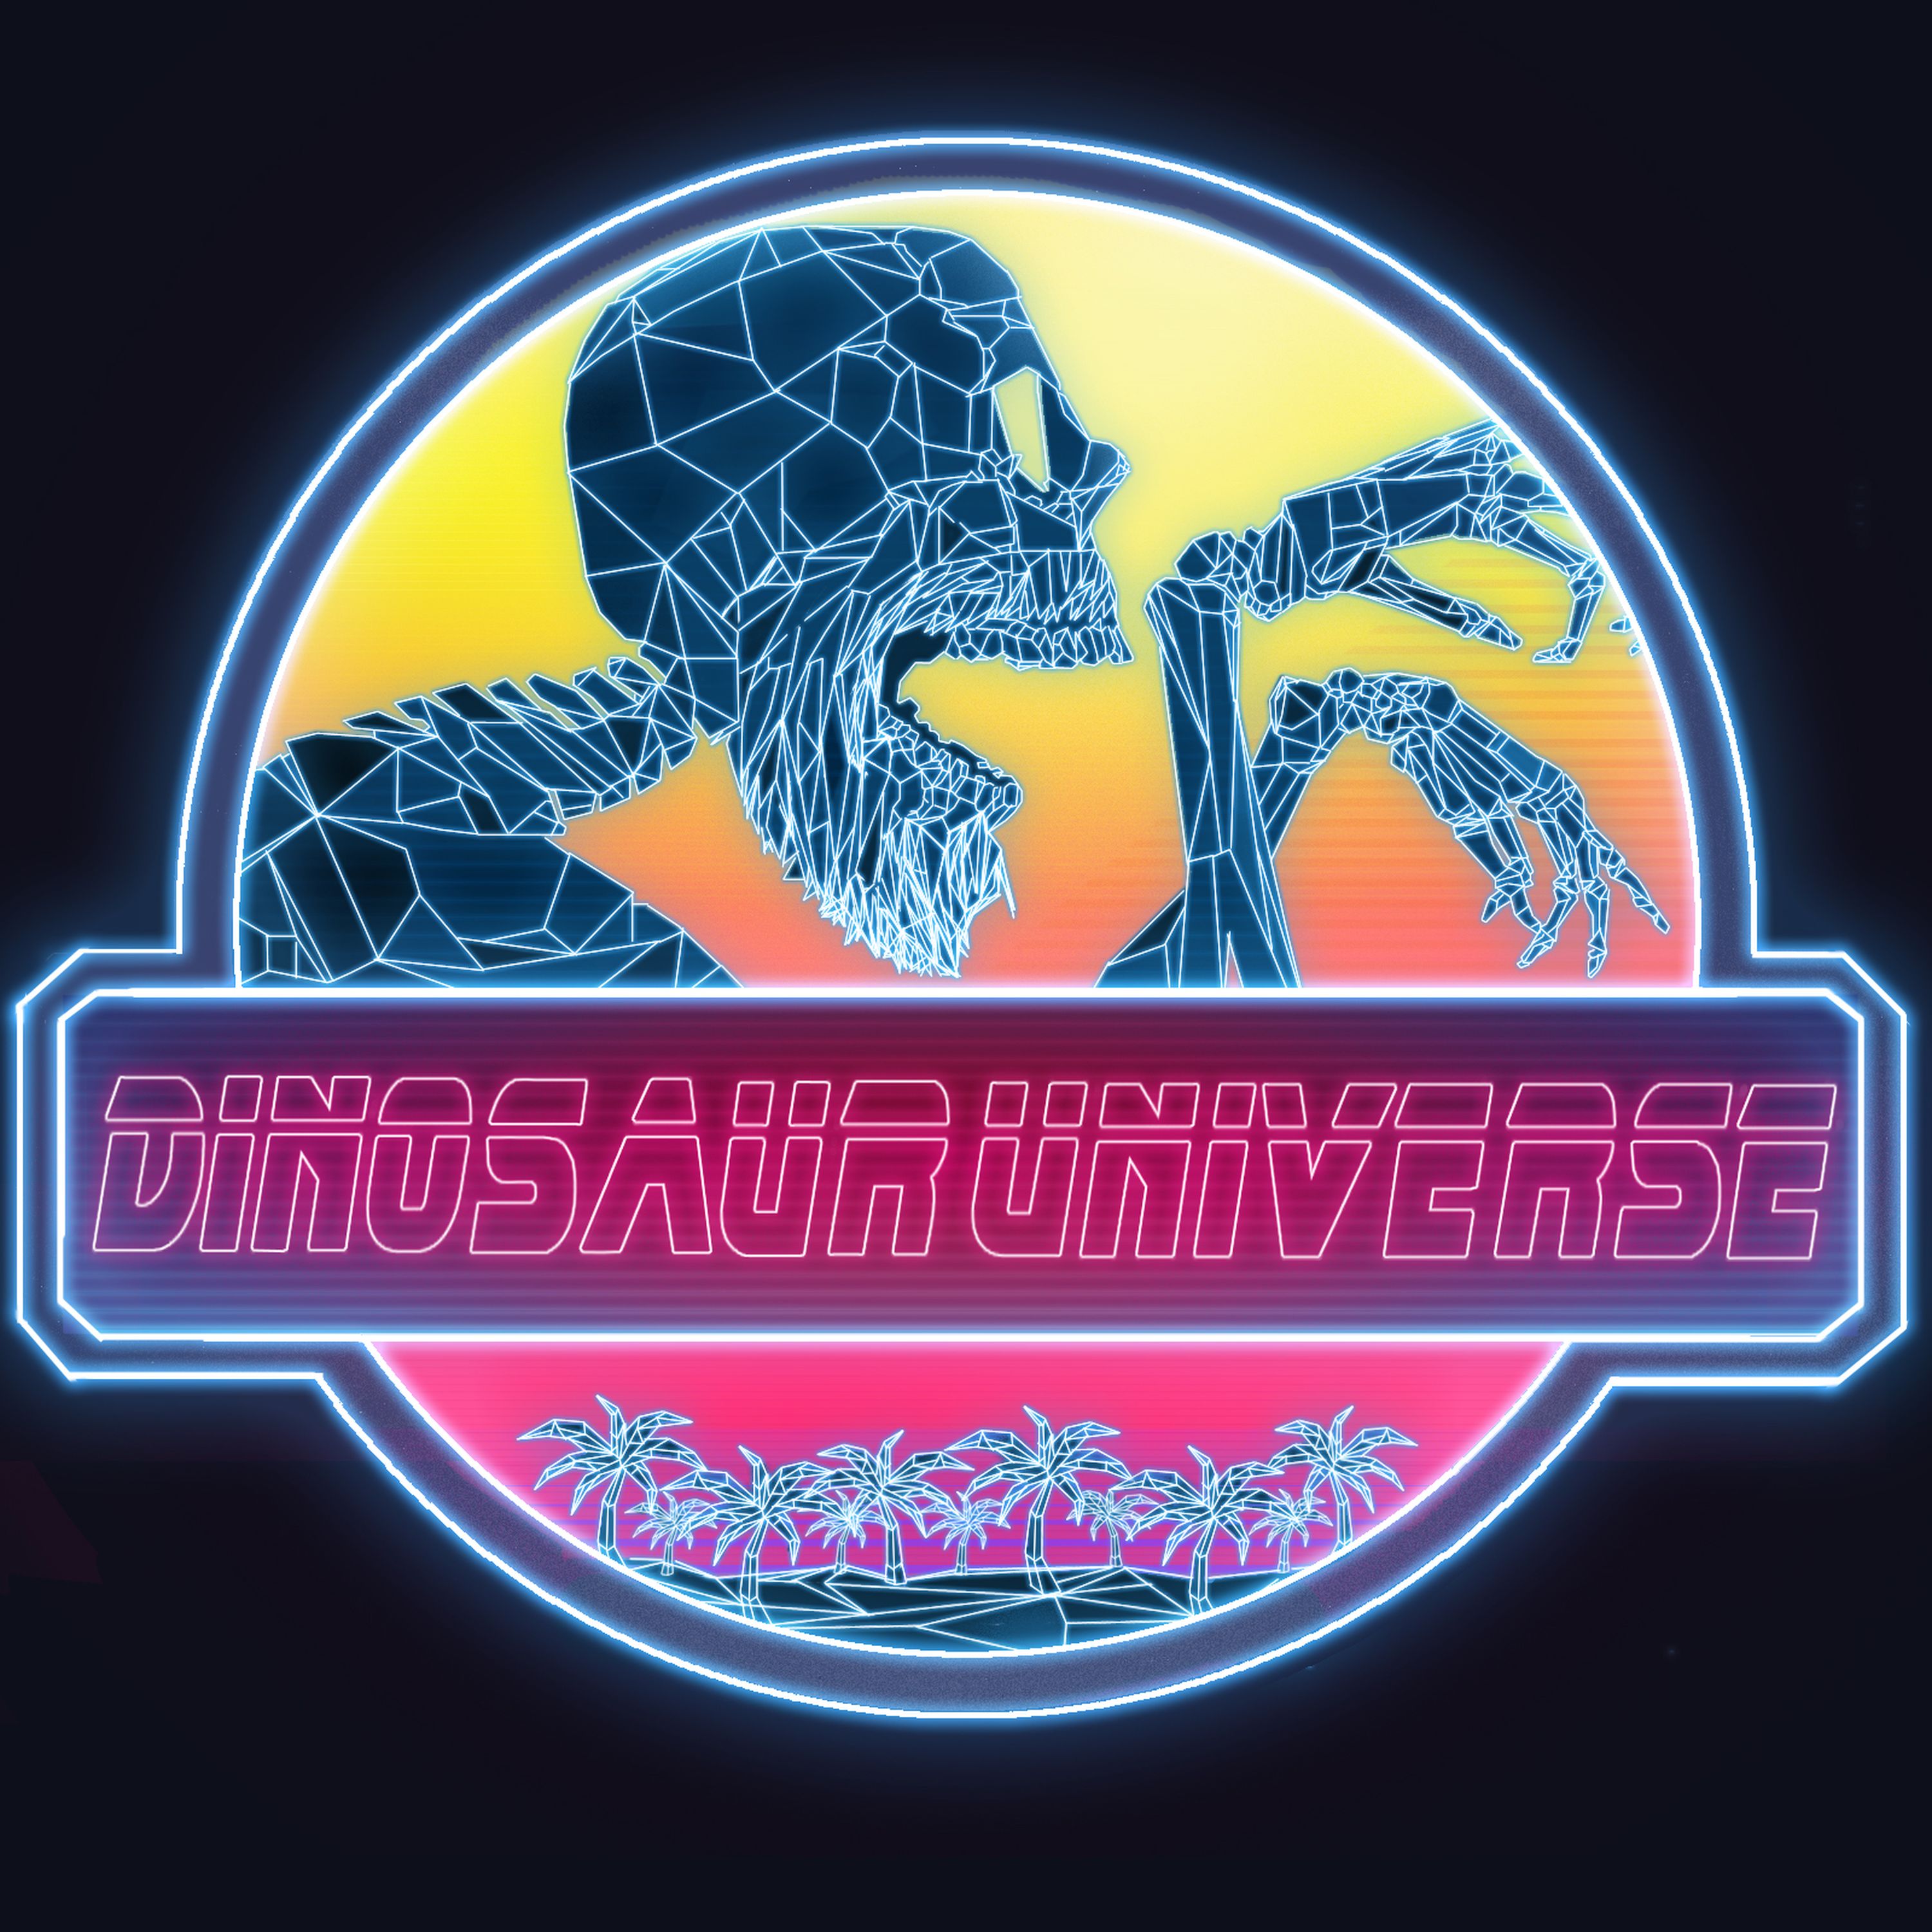 Dinosaur Universe #08 You'll Know the Cue